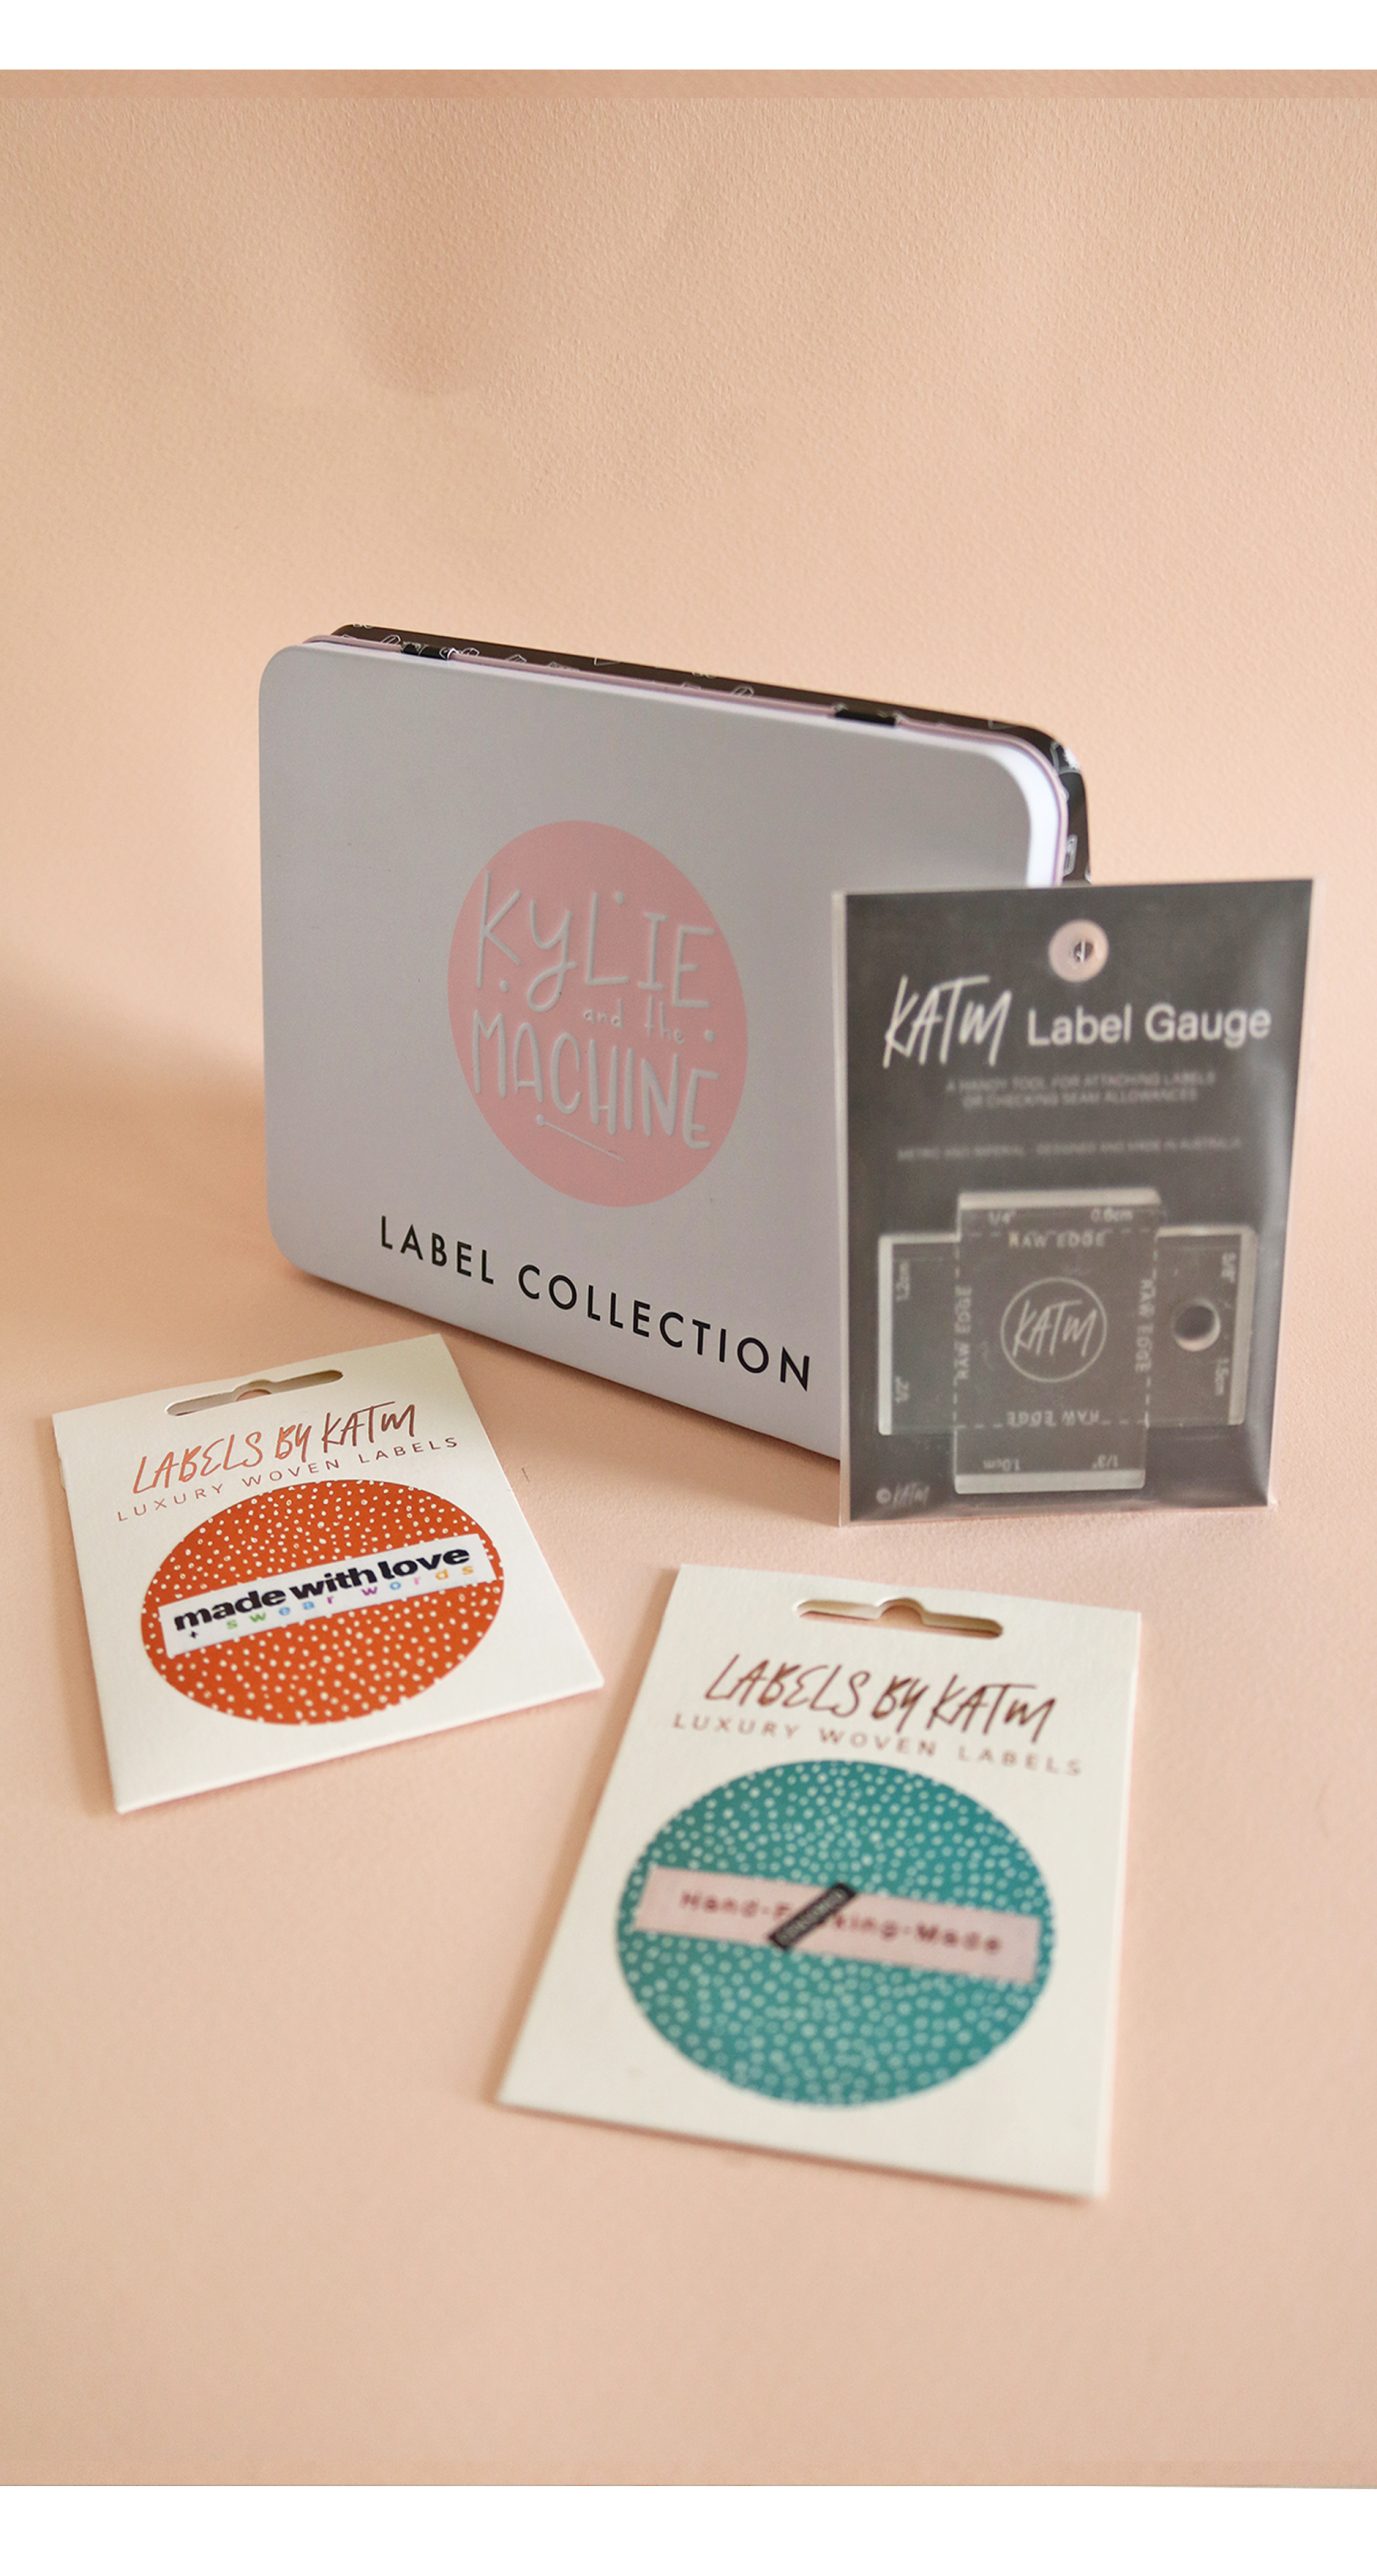 Photo showing the Gift Set Sweary Bundle from Kylie & The Machine on The Fold Line. Kylie & The Machine make beautiful labels to sew into your handmade clothes. This bundle includes two sets of labels (Hand fucking Made and Made with Love and Swear Words), collectors tin and label gauge, making it the perfect gift or present.